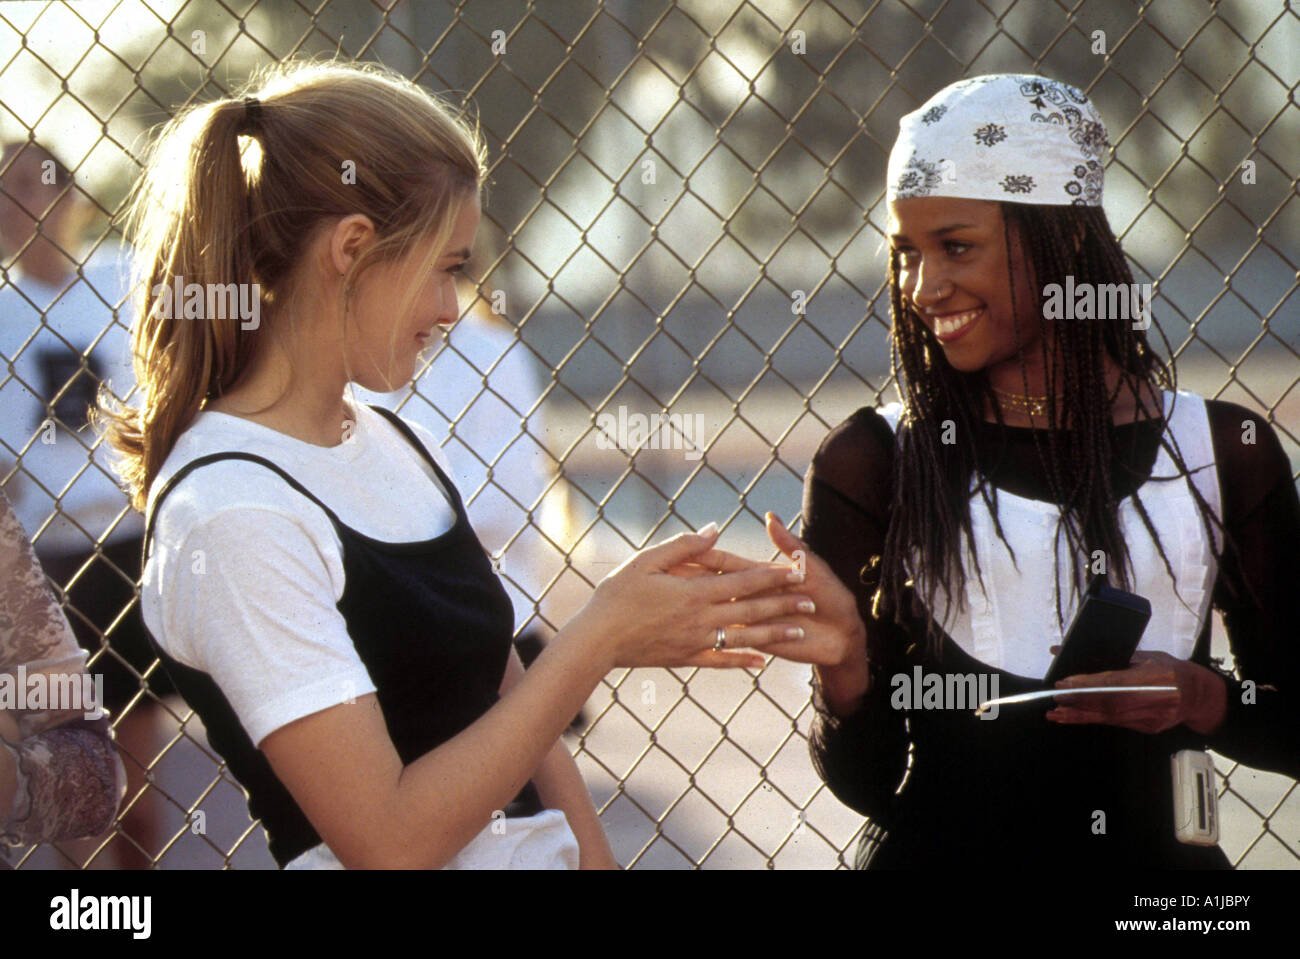 Clueless Year 1995 Director Amy Heckerling Alicia Silverstone Stacey Dash Stock Photo